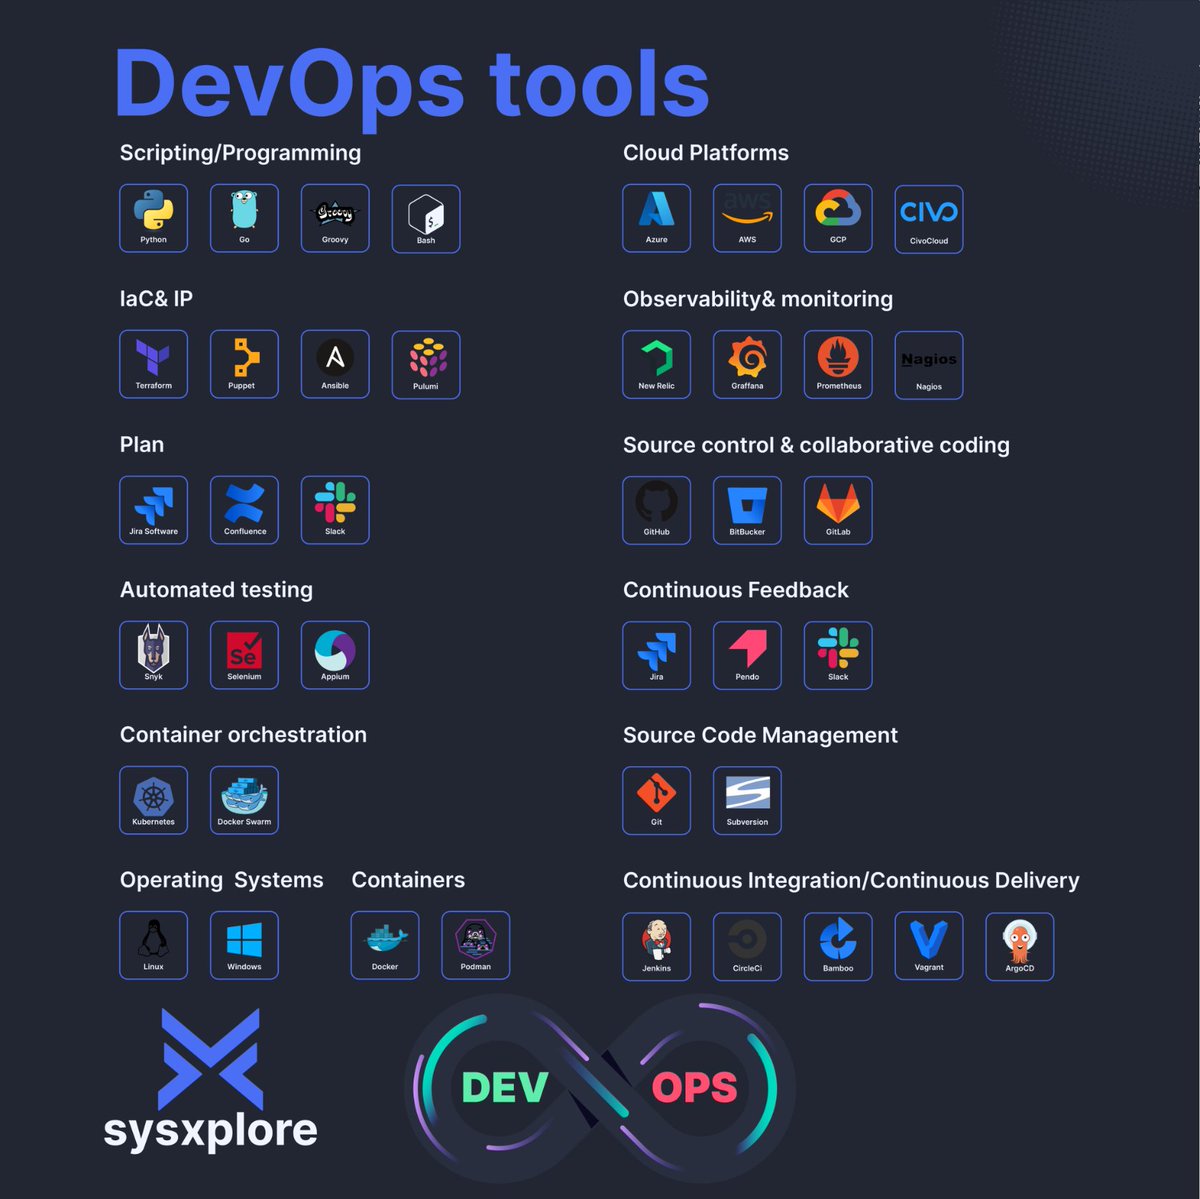 DevOps engineer toolkit🧰🎒

Operating system → Linux (recommended), Windows

Programming → Go, Python, Groovy, Bash

Container orchestration → Kubernetes, Docker Swarm

Containers → Docker, Podman, Containerd

Source Code Management → Git, Subversion

Cloud → AWS, GCP,…